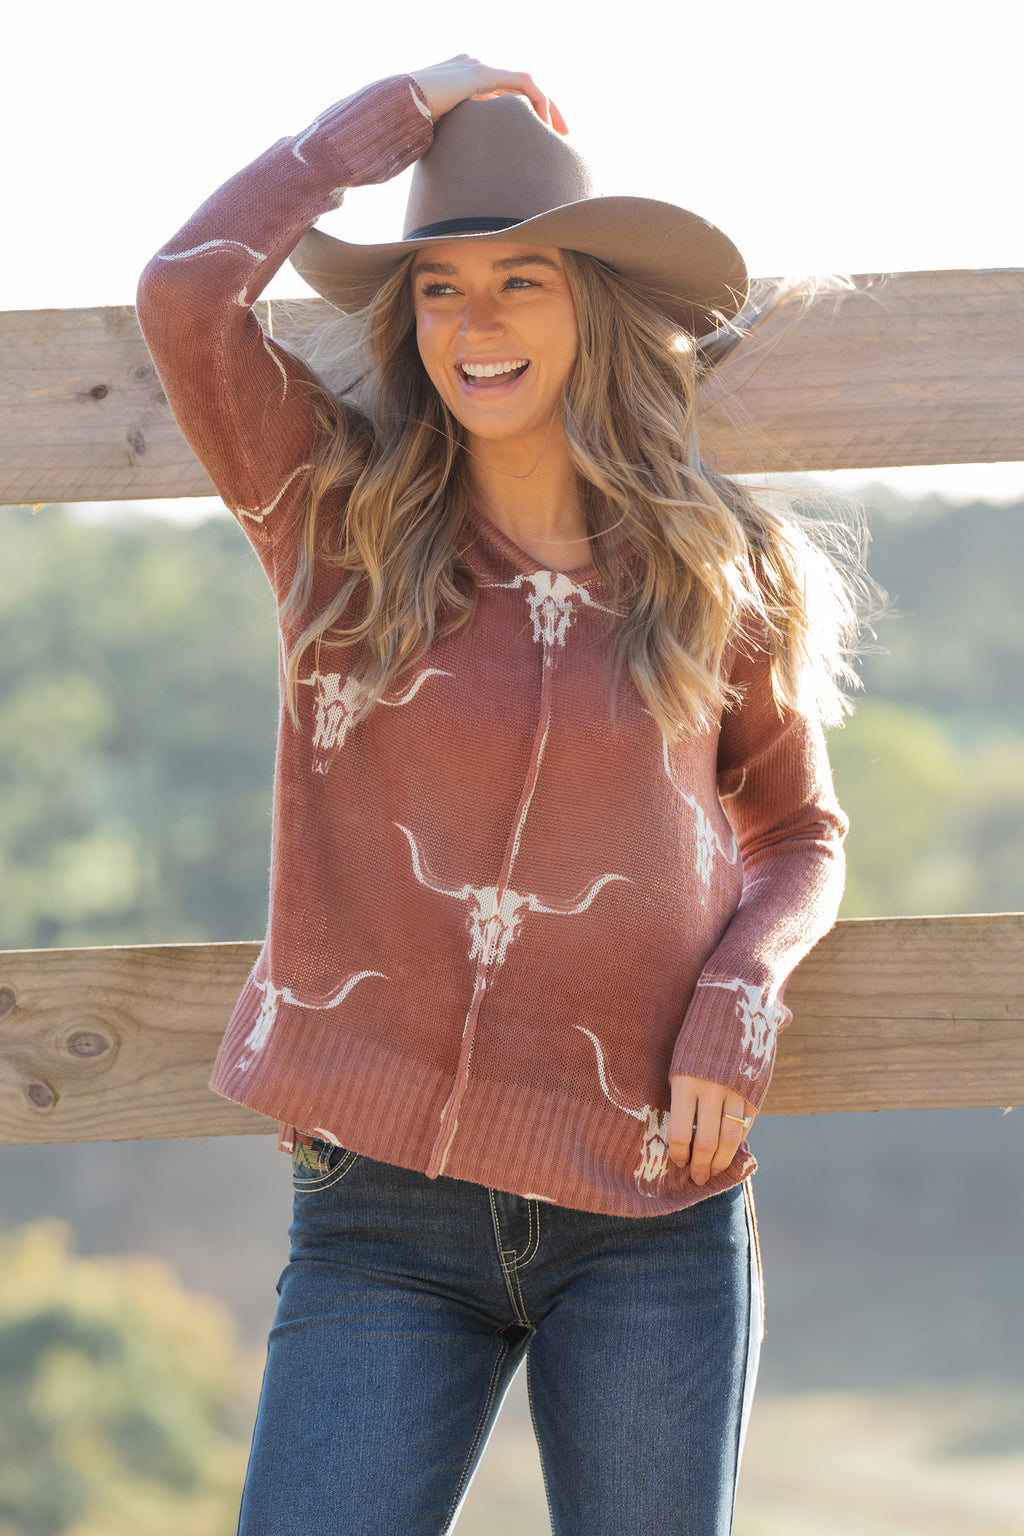 Veola Knitted Pullover